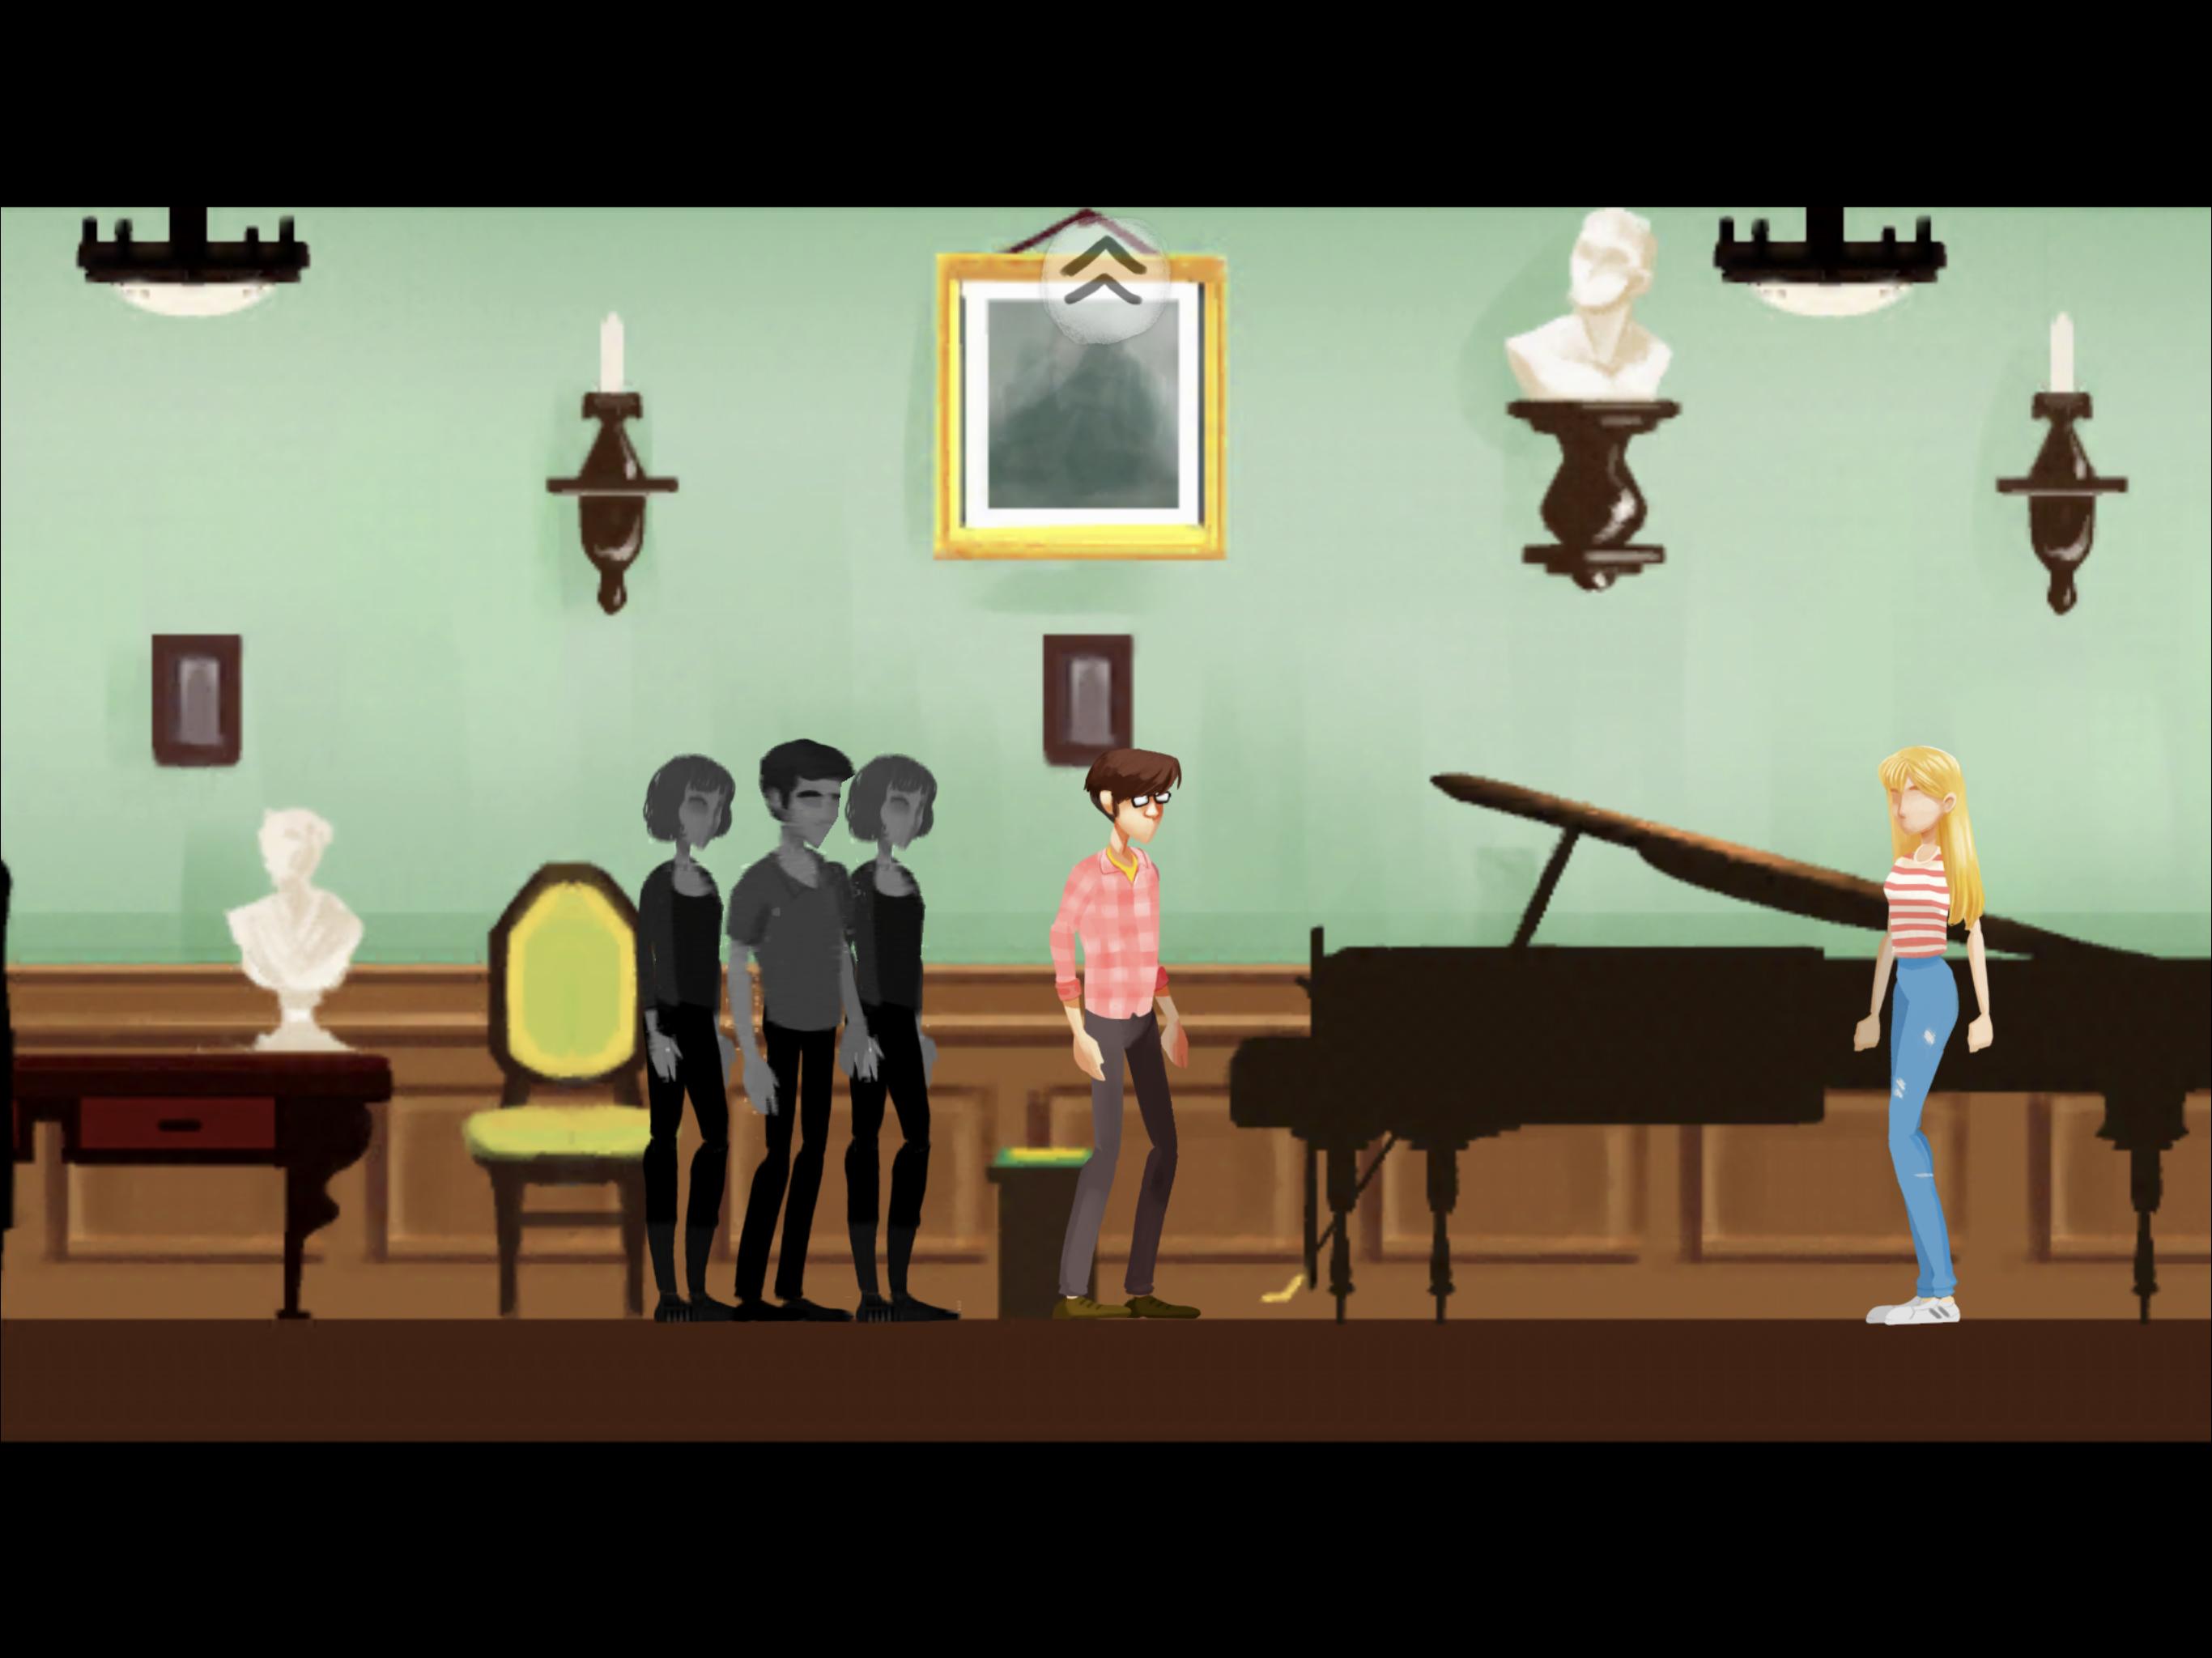 A Life in Music игра. Игры TUOMUSEO. The Godfather: Family Dynasty.